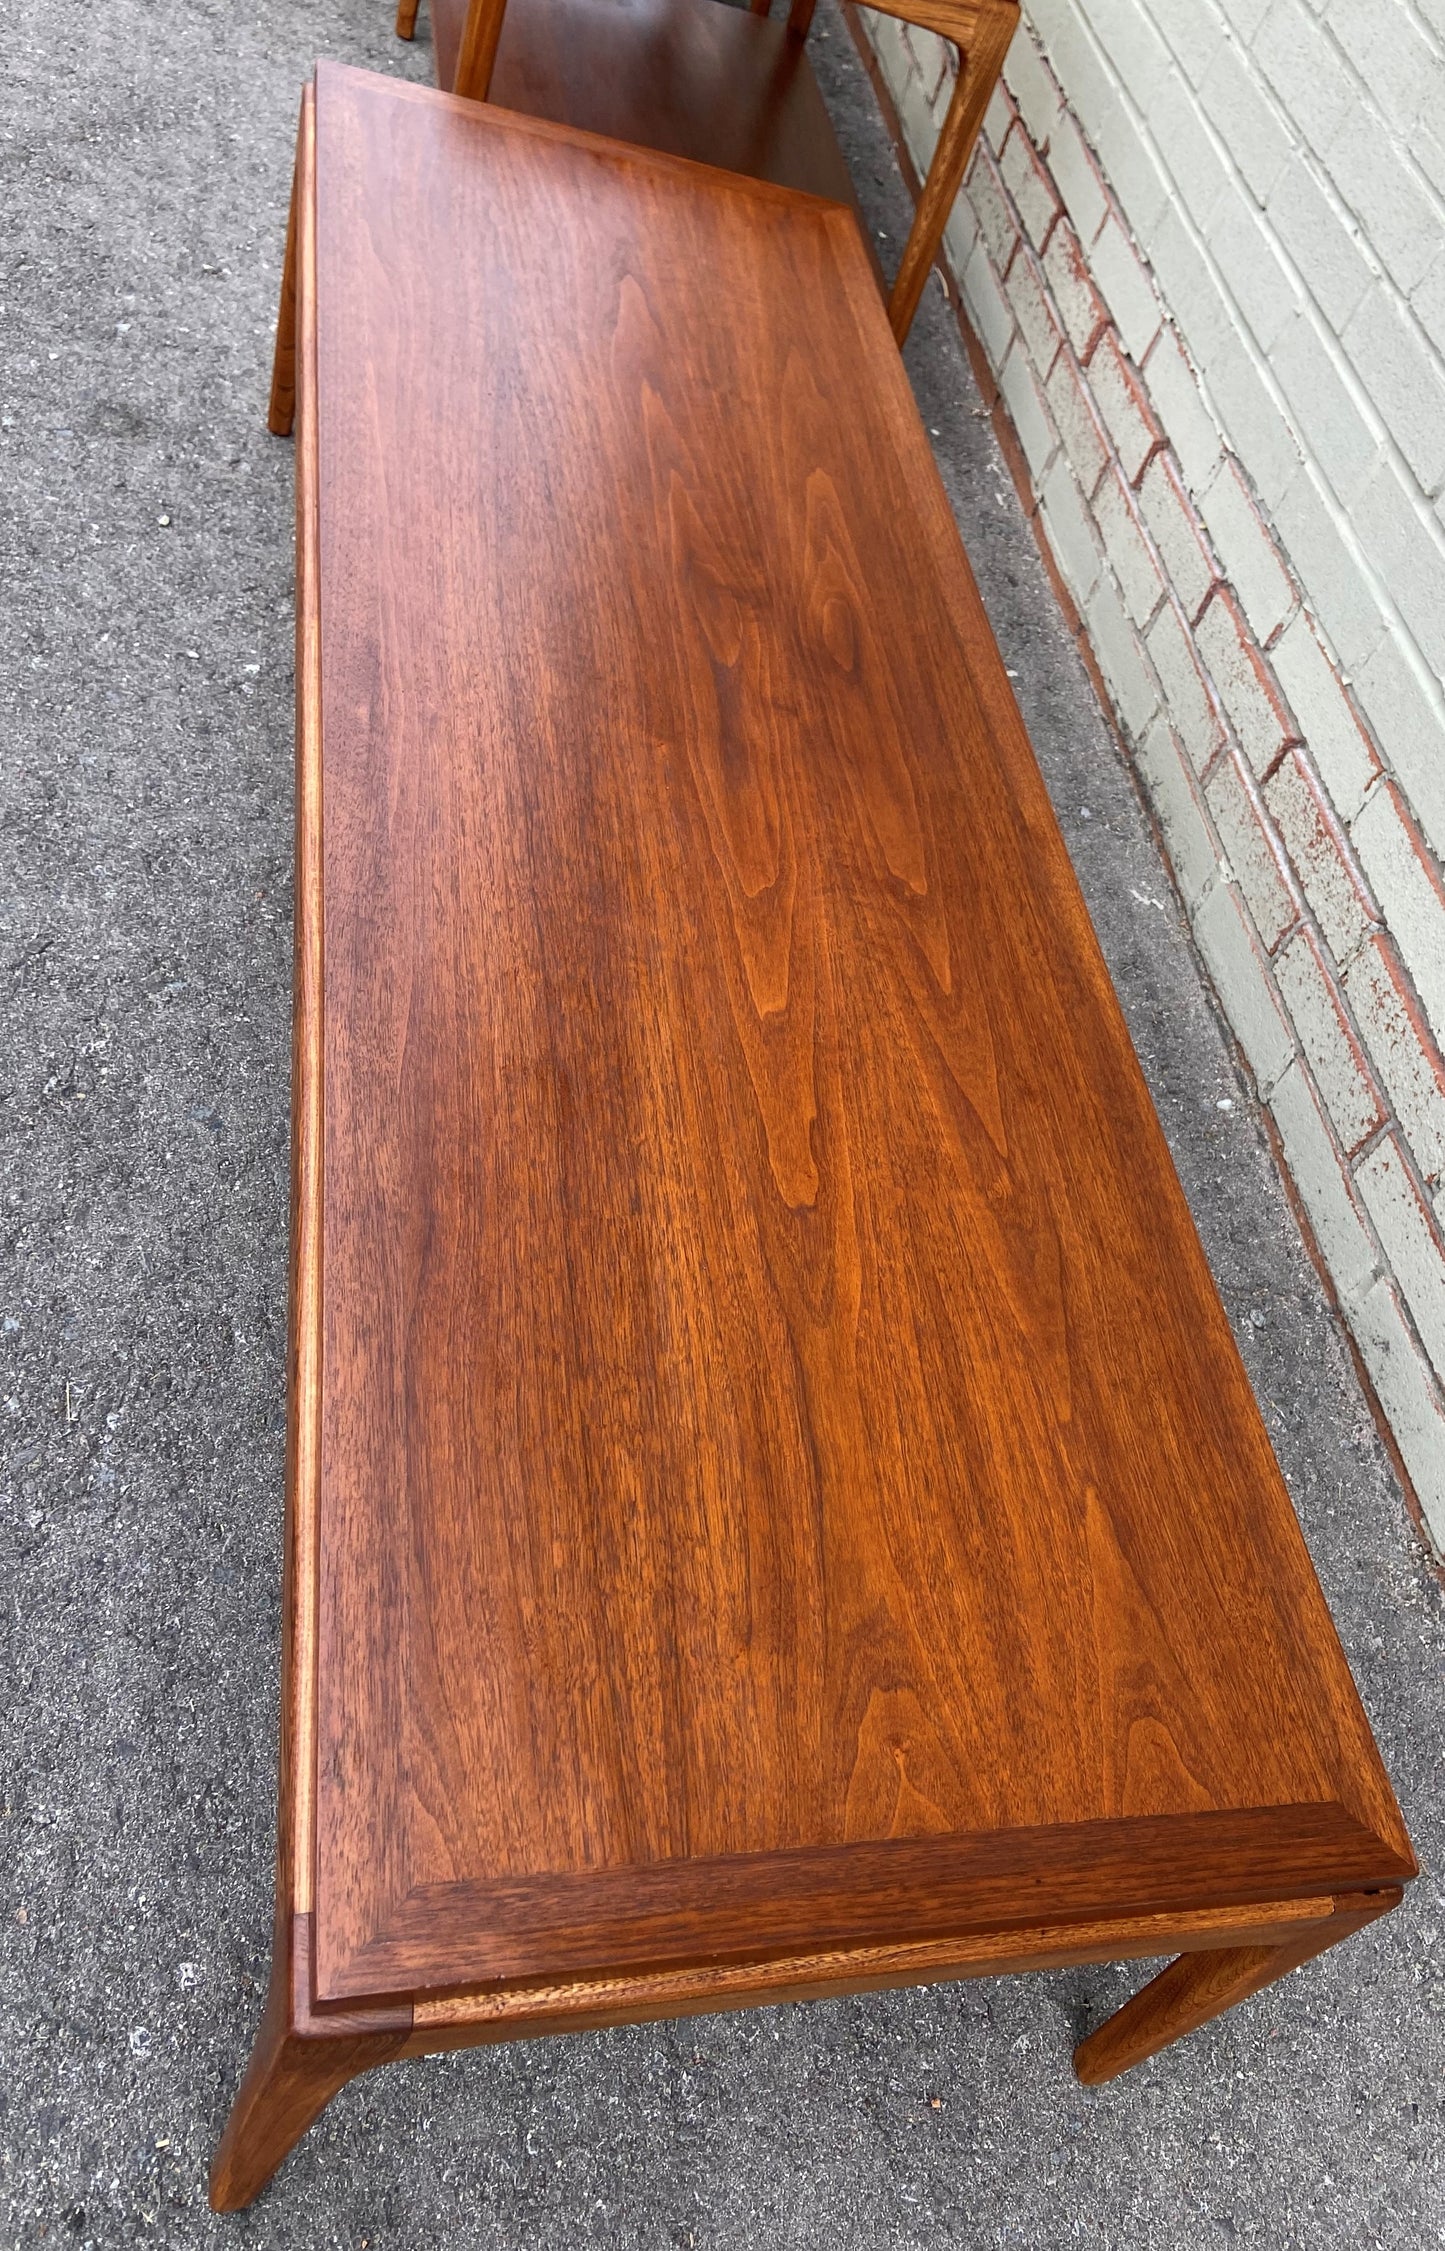 REFINISHED Mid Century Modern Walnut Coffee Table by Lane, PERFECT, Low